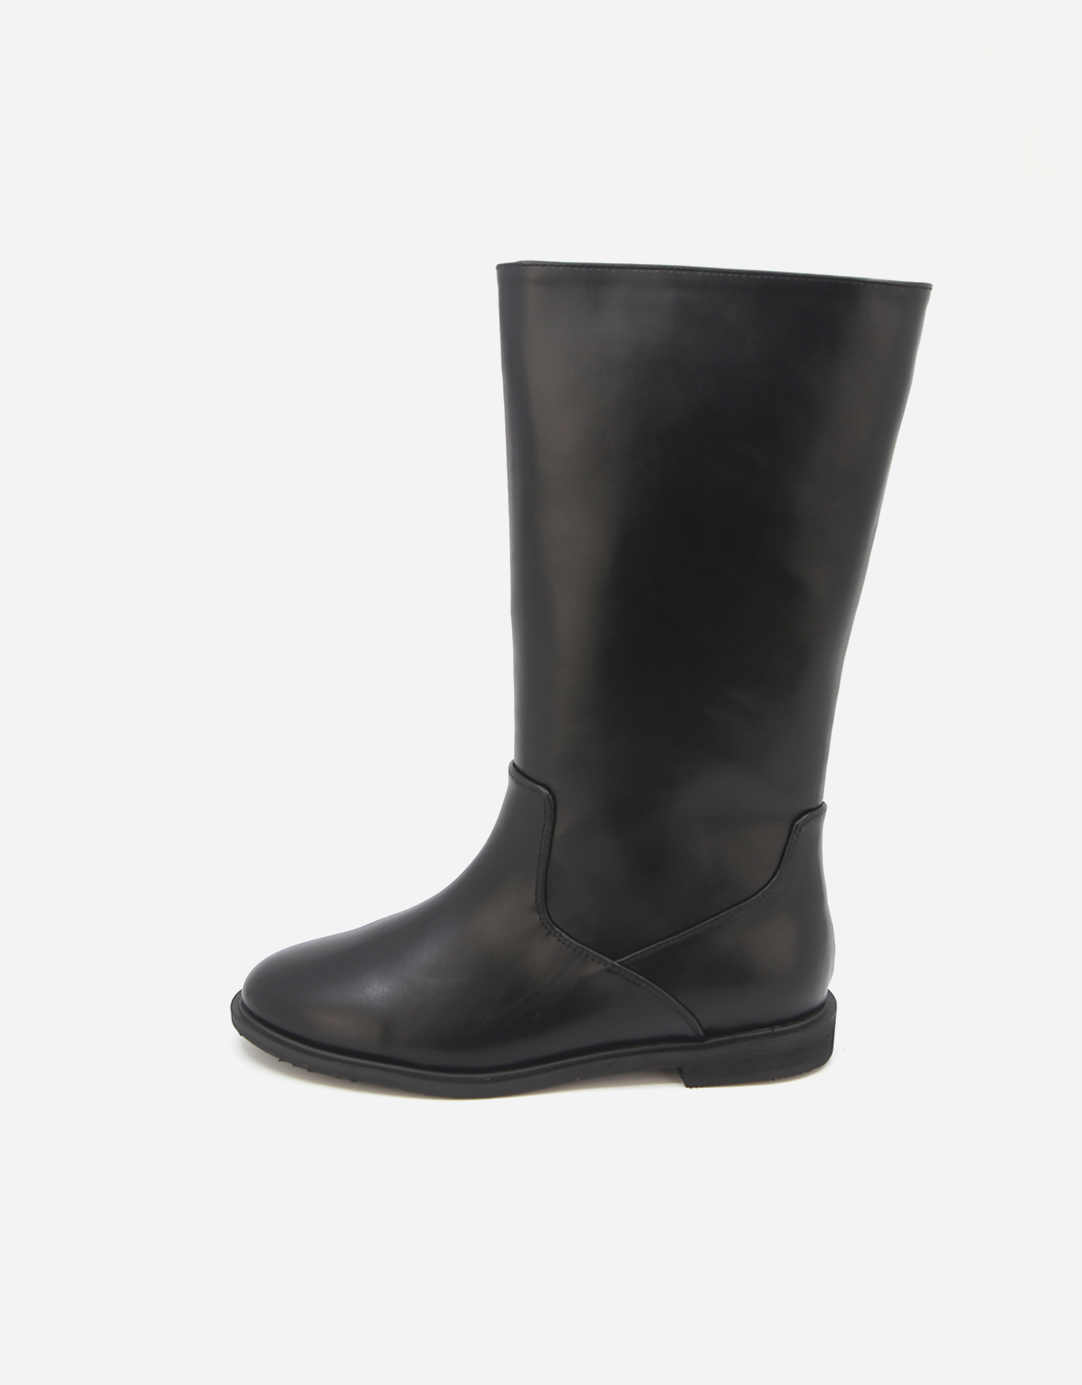 BASIC WIDE MIDDLE HALF BOOTS